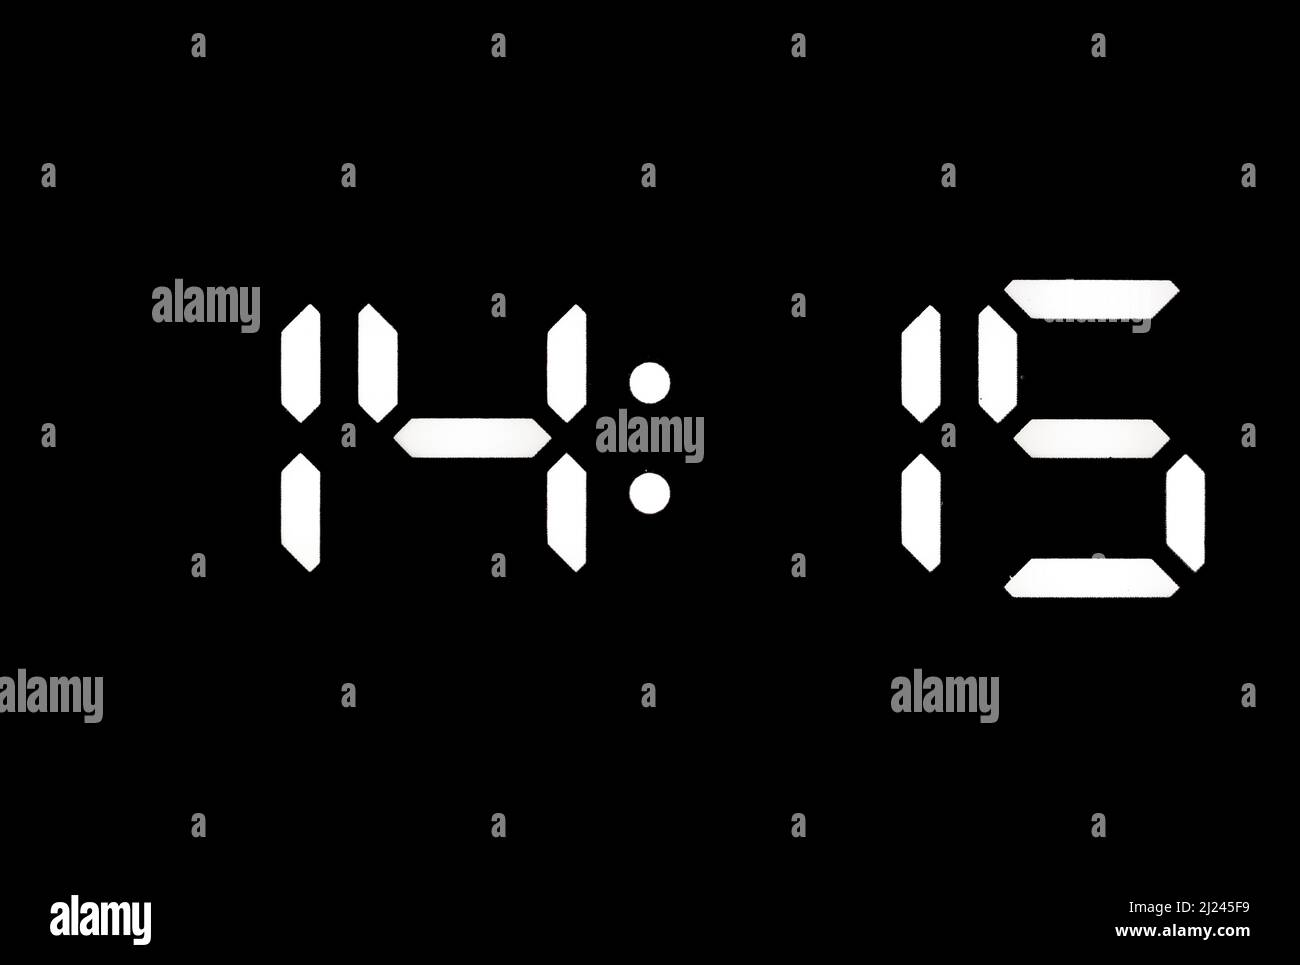 Real white led digital clock on a black background showing time 14:15 Stock Photo